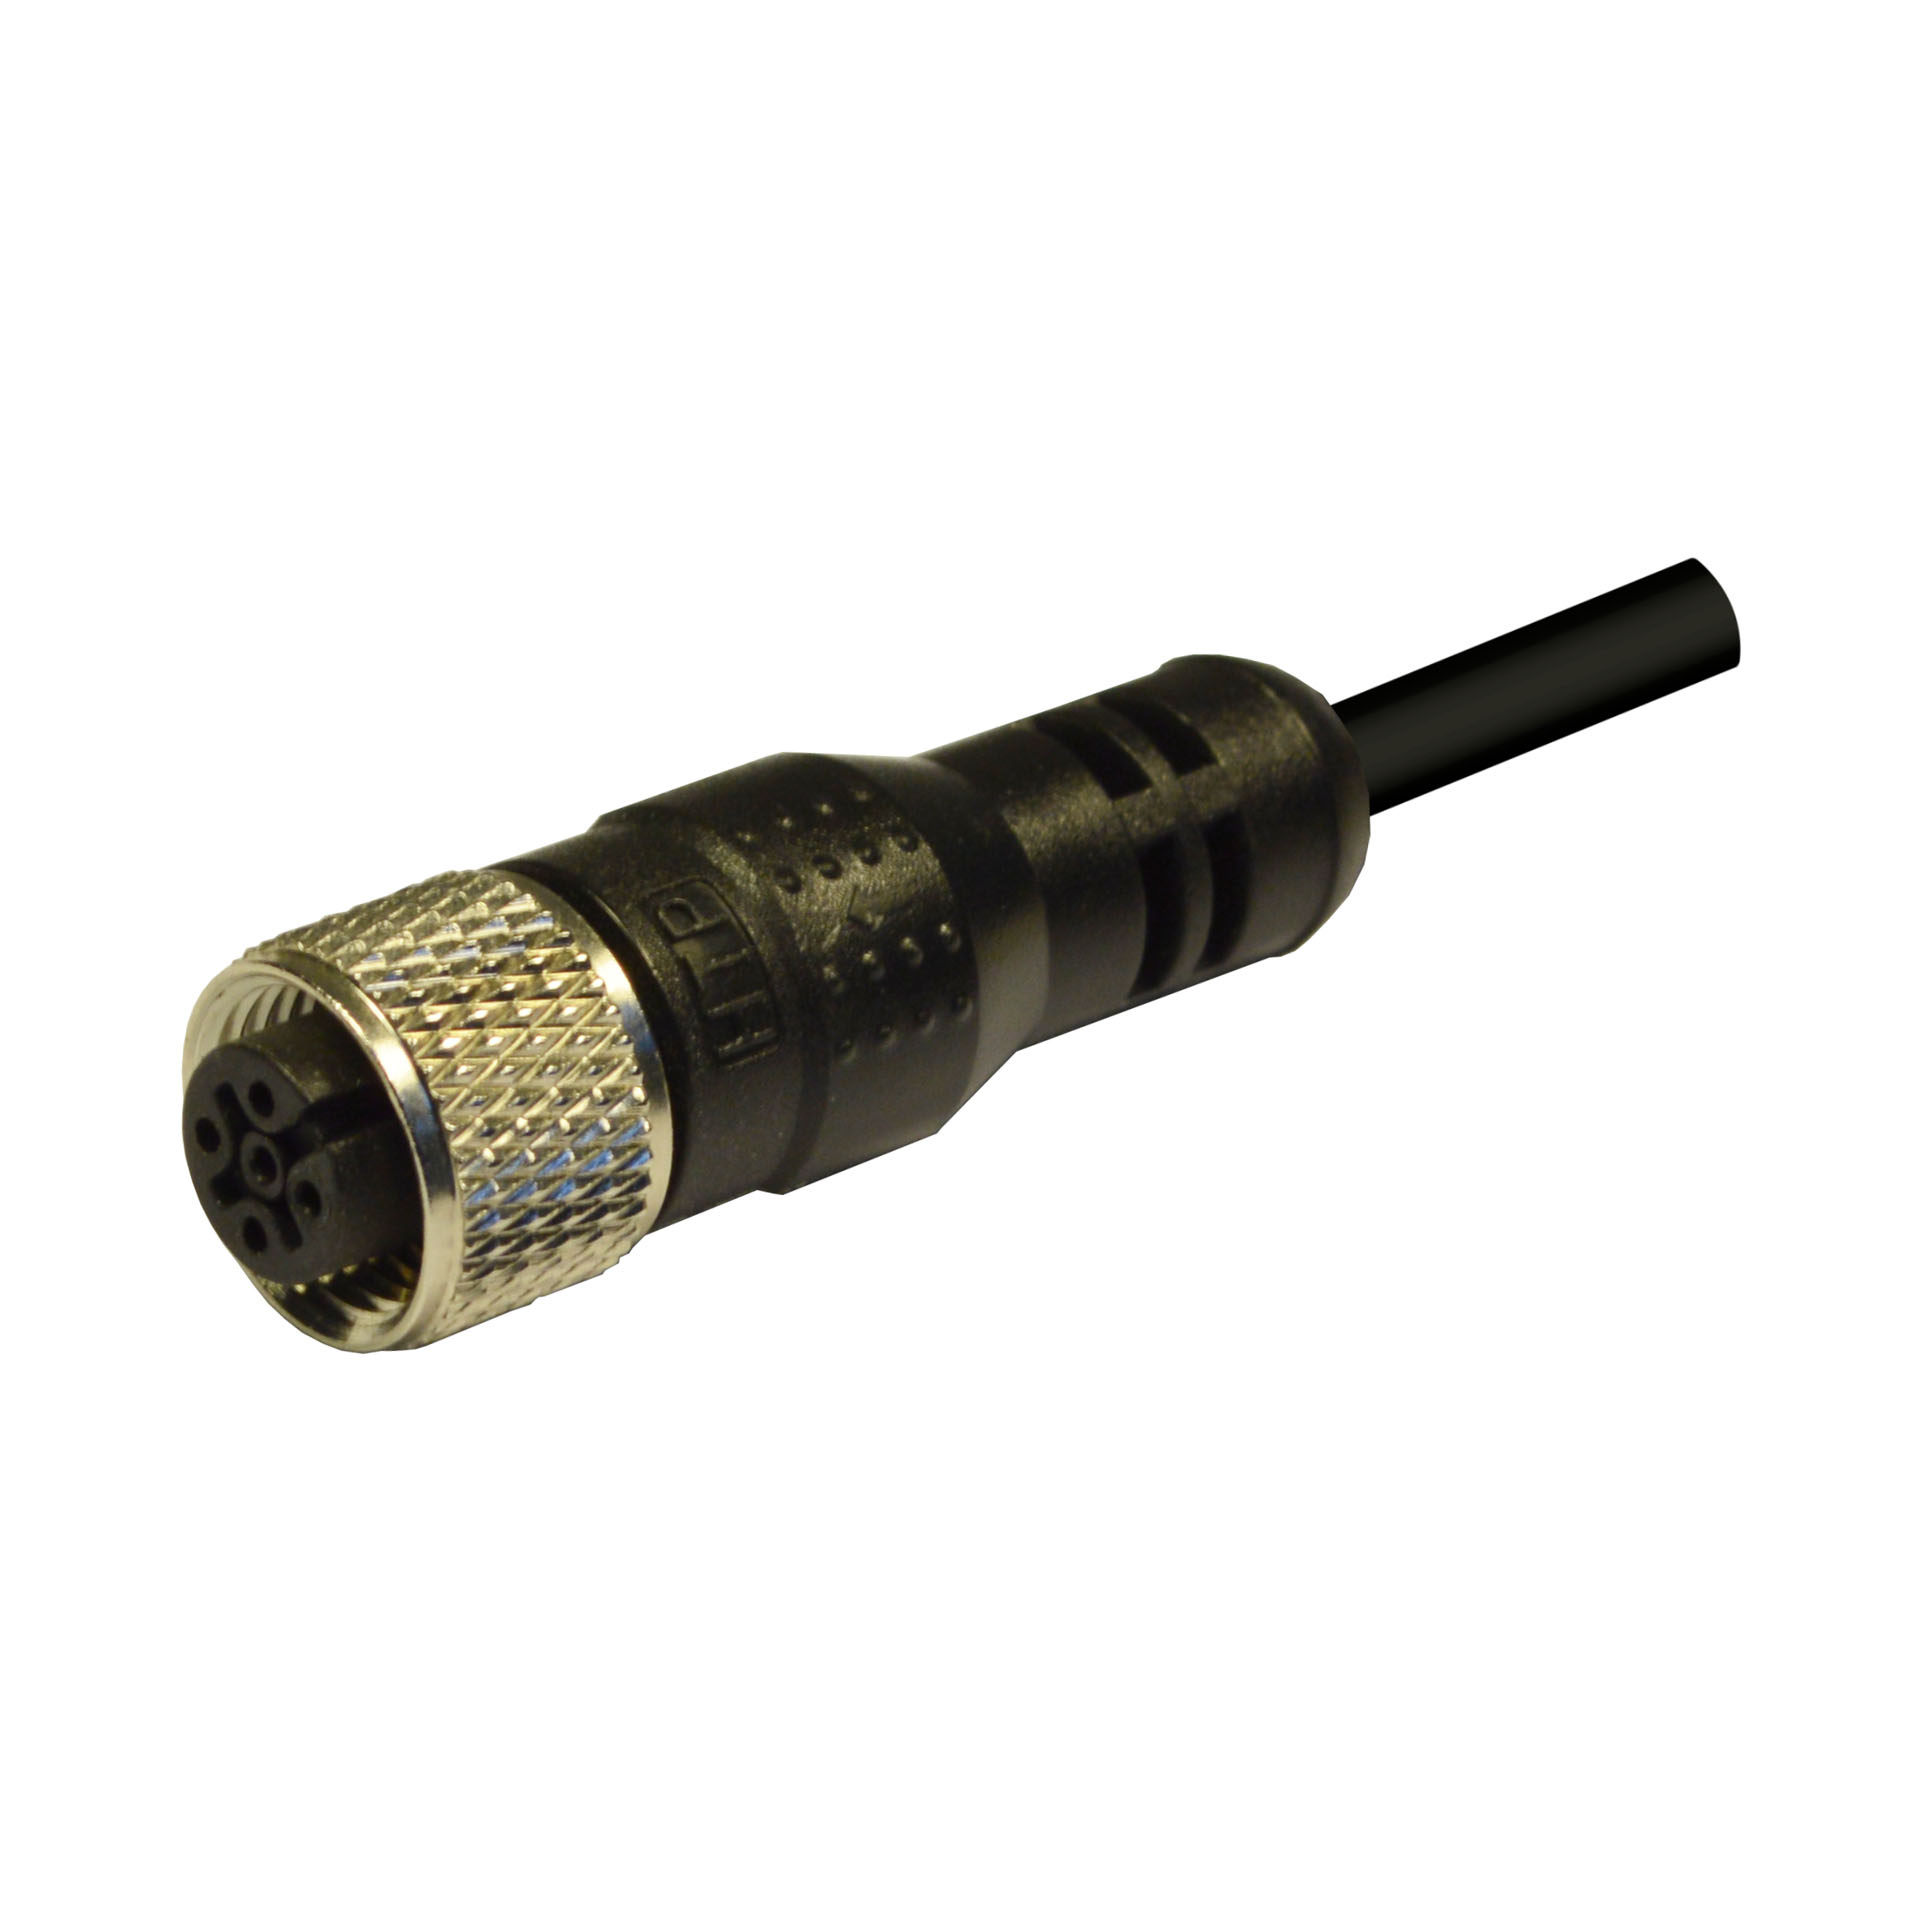 M12 female,180°,4p.,PUR/PUR ULstyle21576,4x22AWG,shielded,black,10m